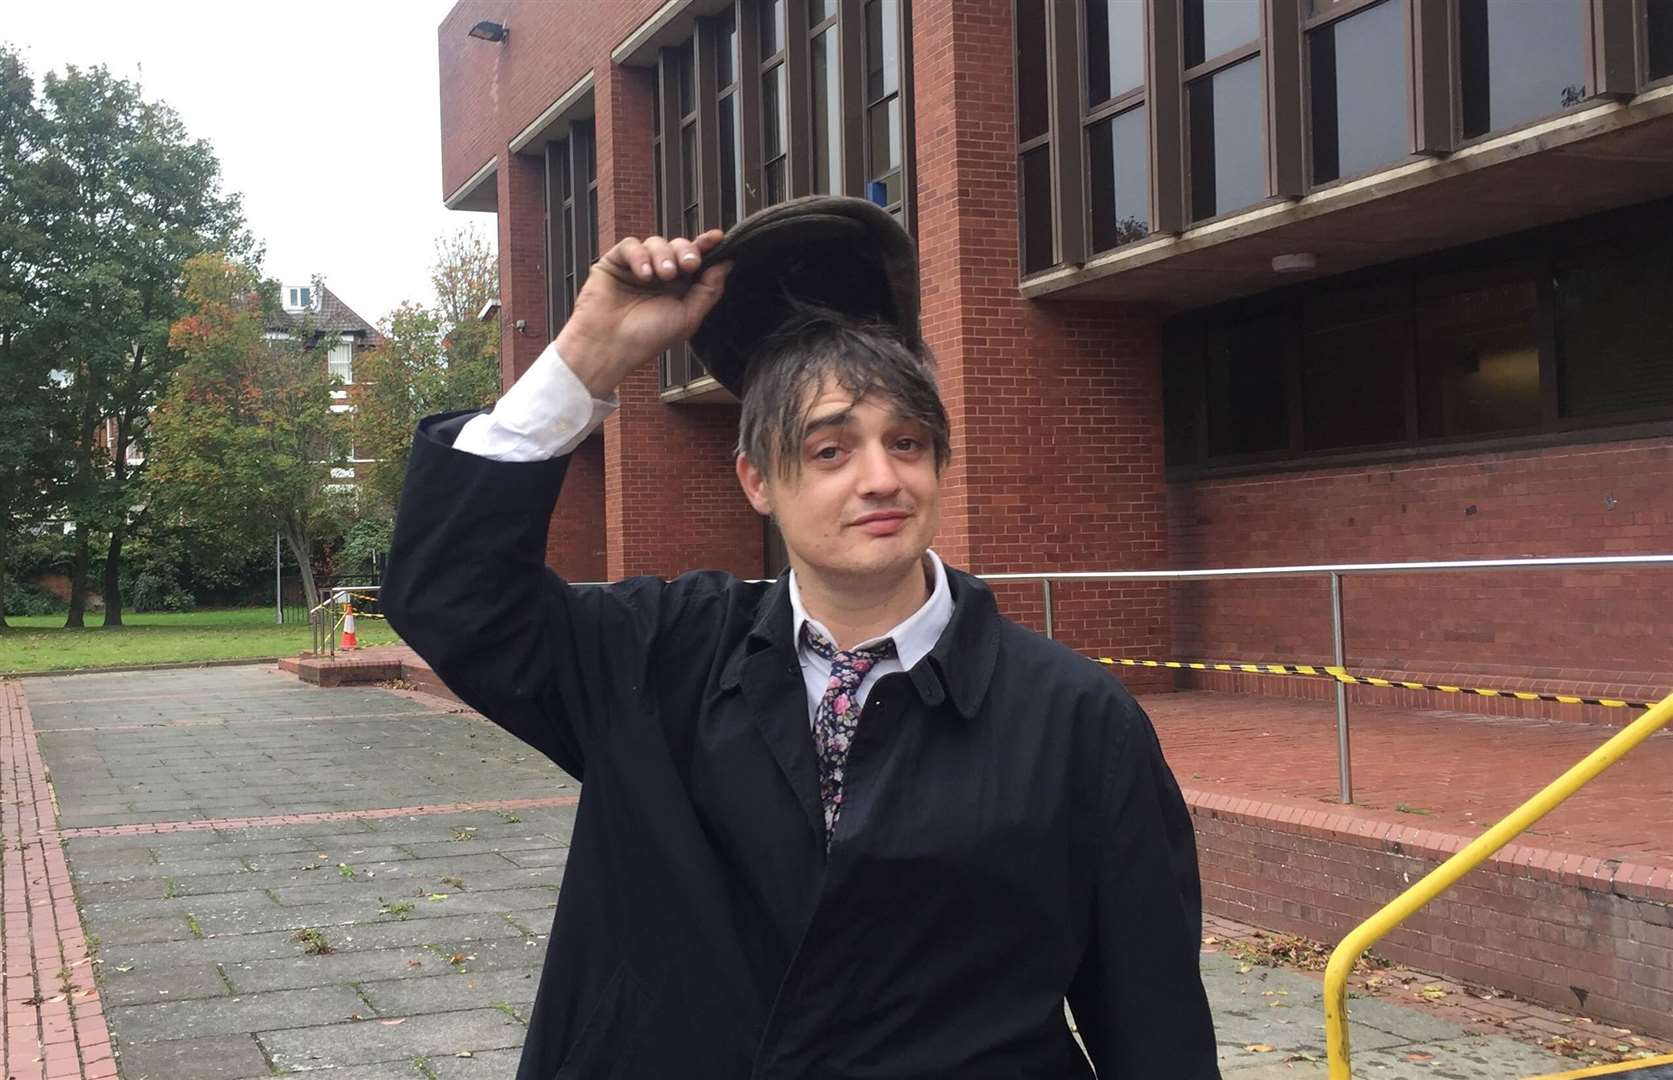 Pete Doherty doffed his hat outside court after being banned from driving